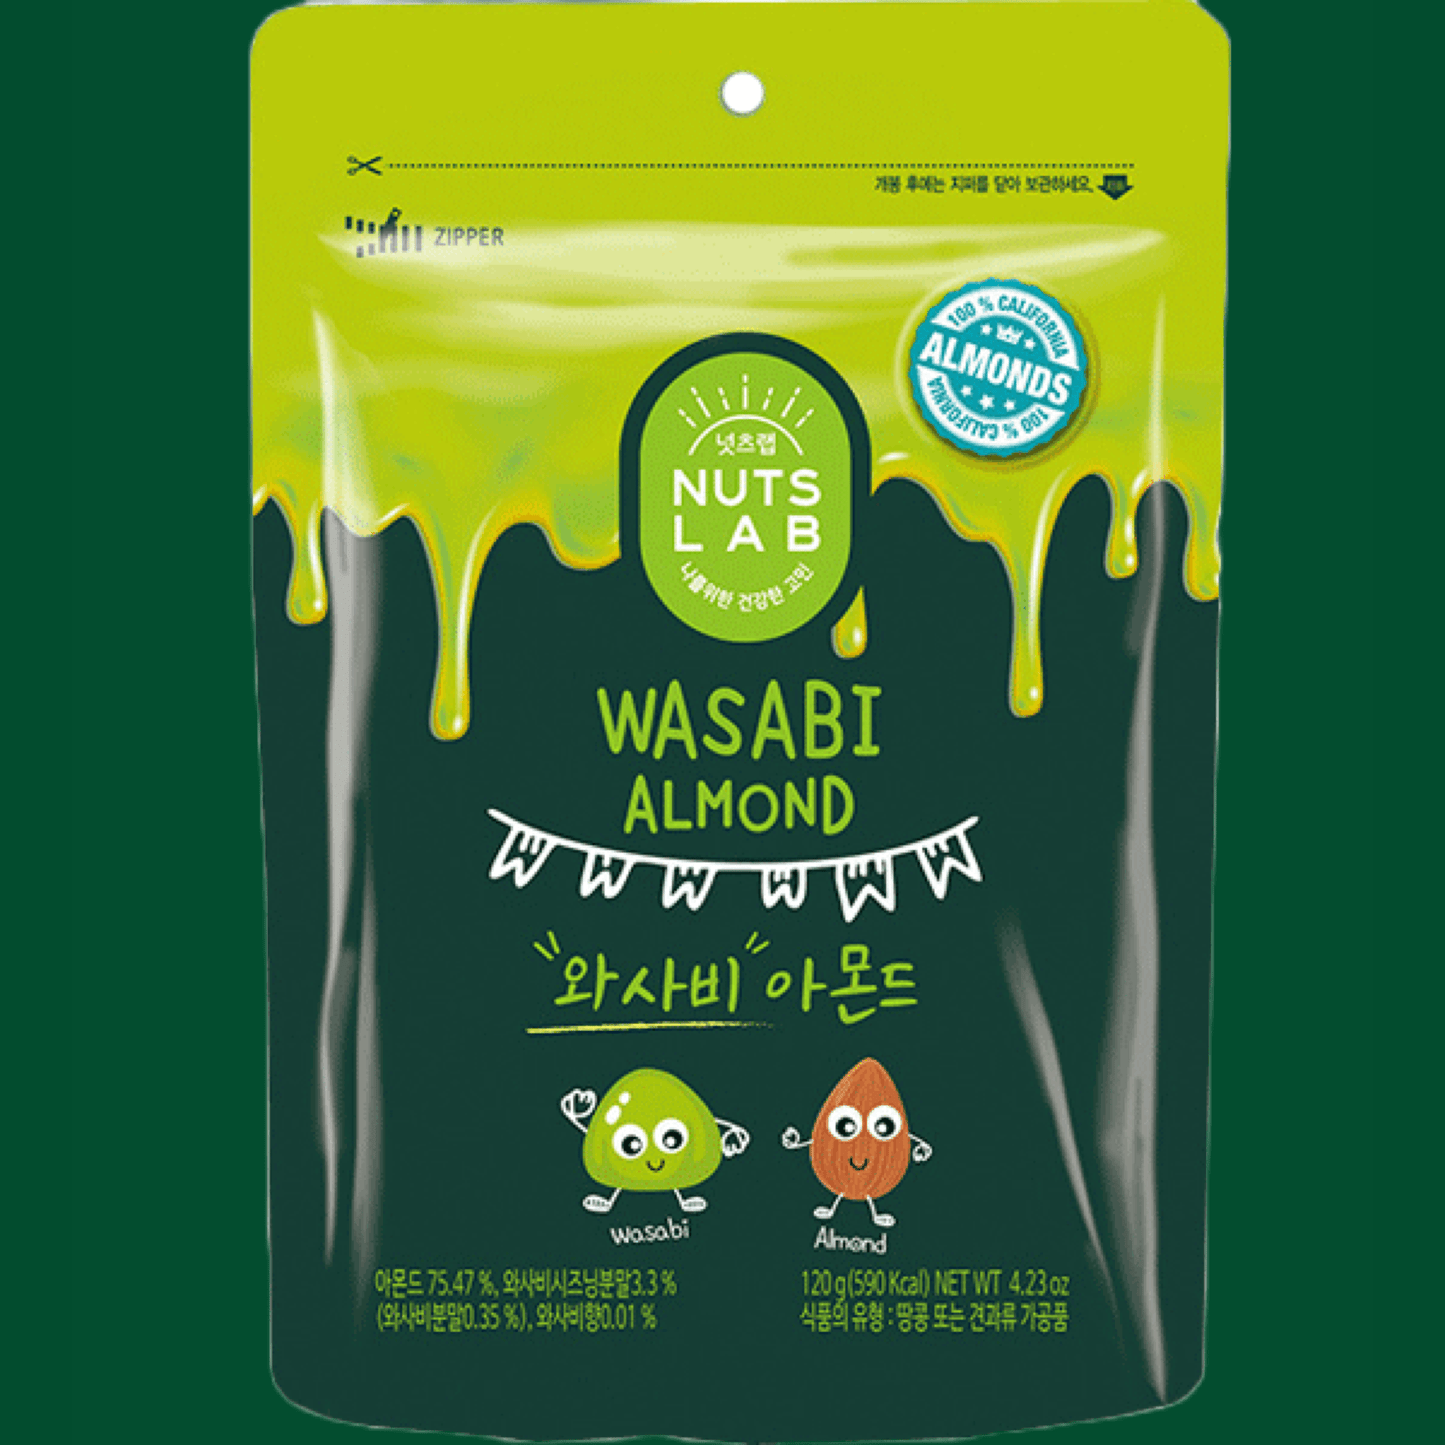 Nuts Lab Wasabi Almond(120G) - The Snacks Box - Asian Snacks Store - The Snacks Box - Korean Snack - Japanese Snack